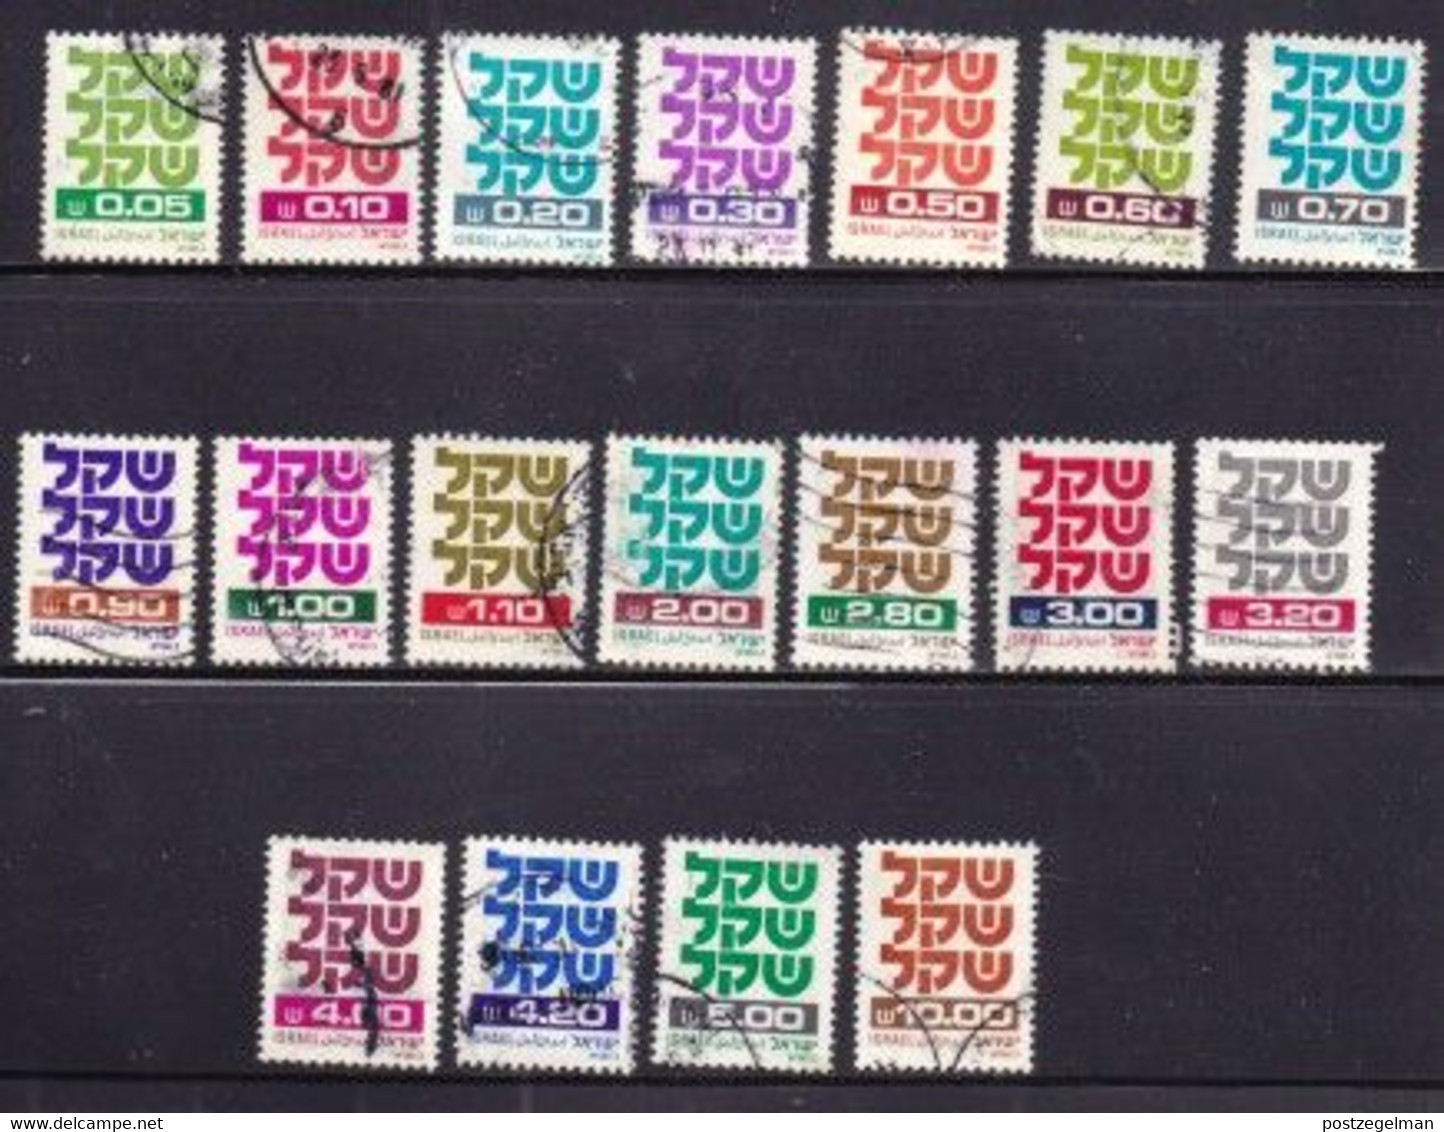 ISRAEL, 1980, Used Stamp(s)  Without  Tab, Shekel, SG Number(s) 784-802a, Scannr. 19206, 18 Values Only - Used Stamps (with Tabs)